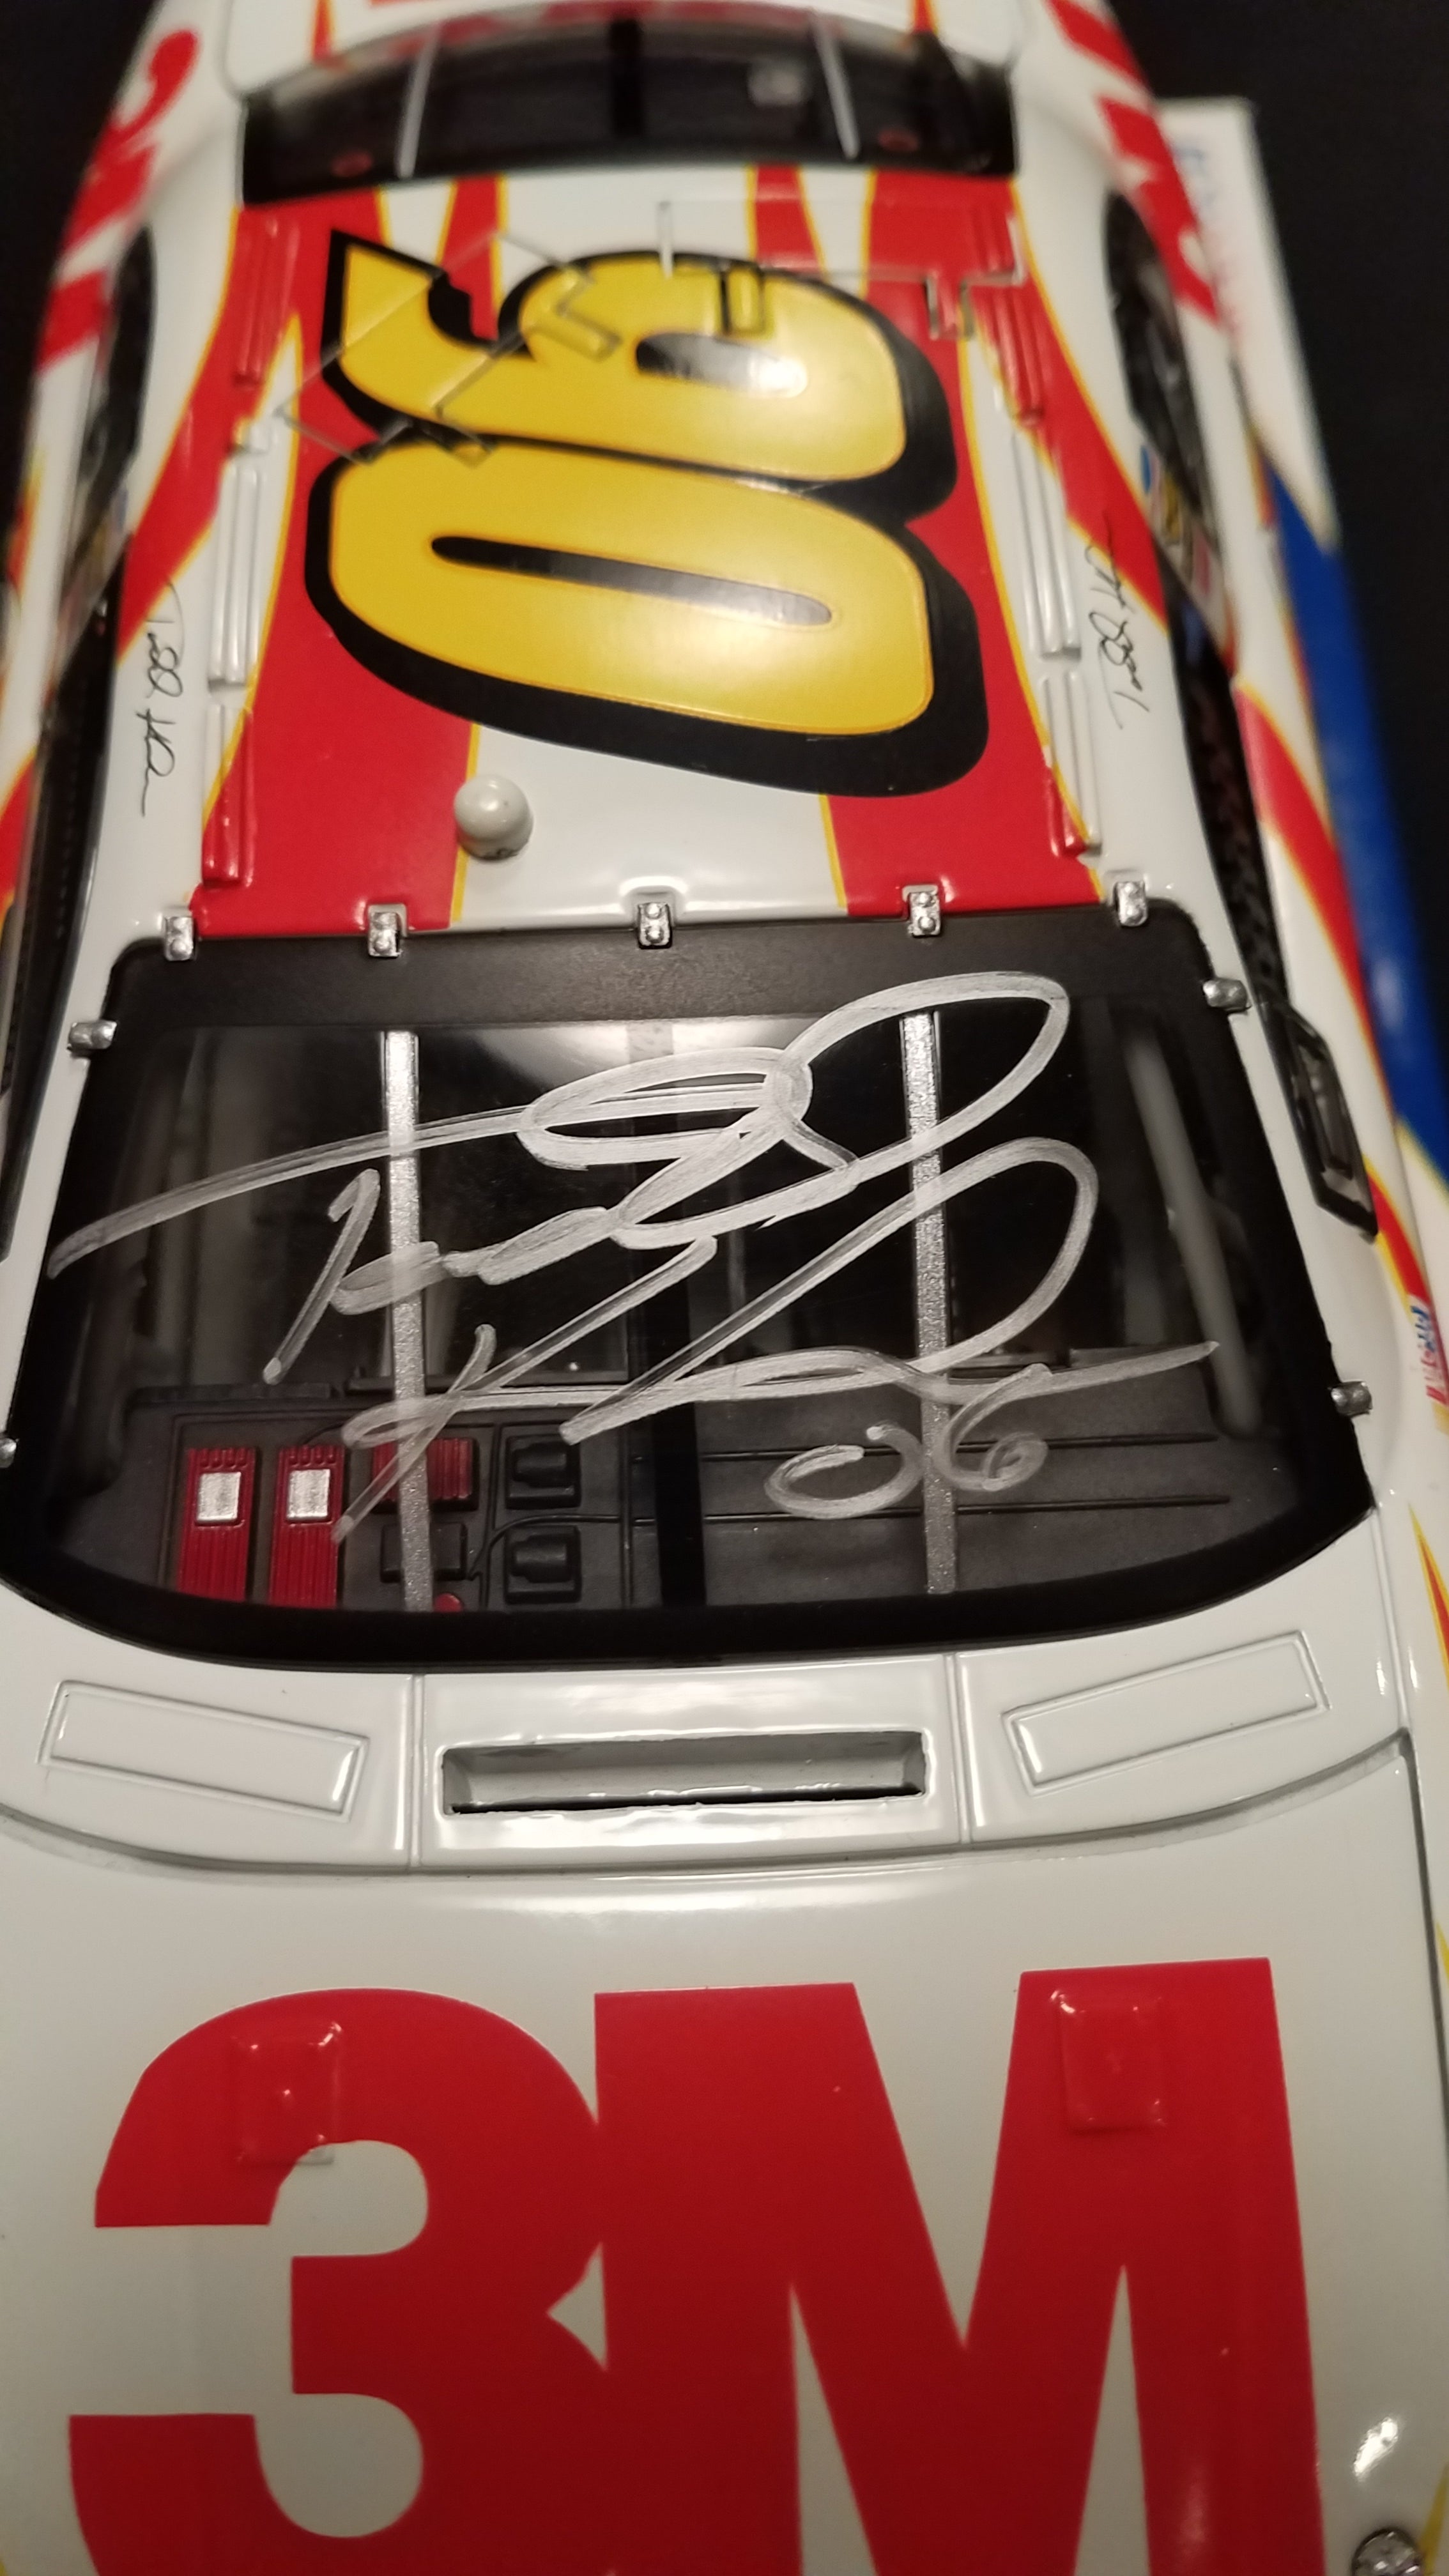 Autographed Todd Kluever 3M Ford 1:24 Diecast in Orginal Box